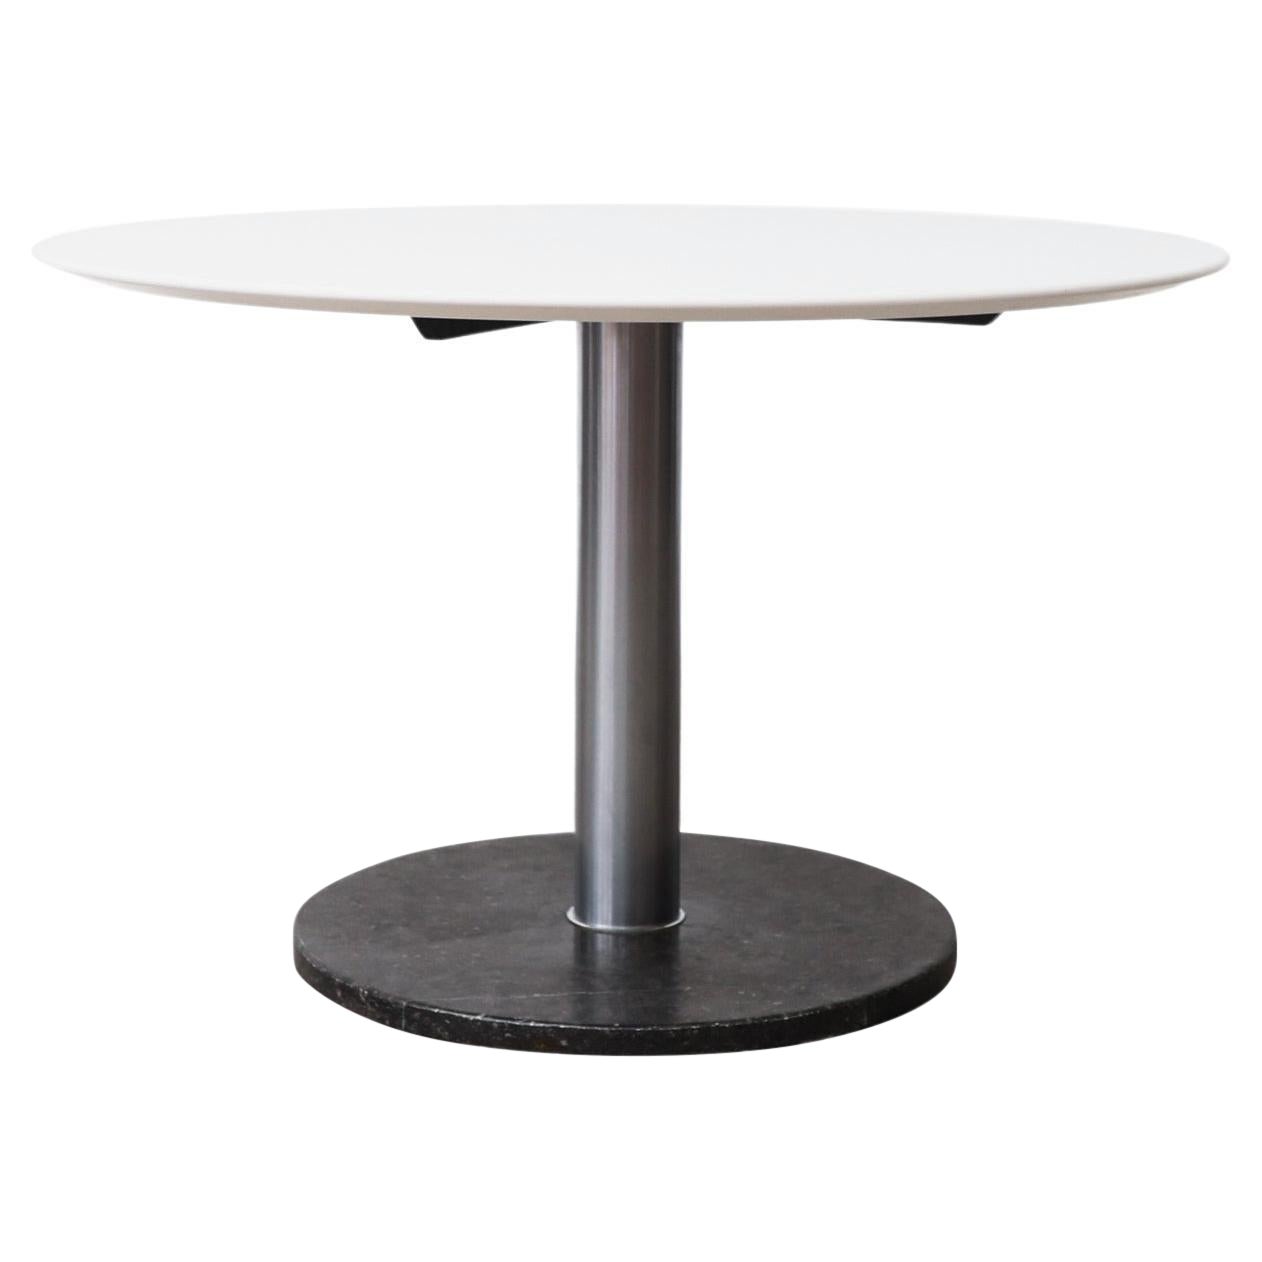 Pedestal Dining Table with Black Marble Base, Chrome Stem, & White Laminate Top For Sale